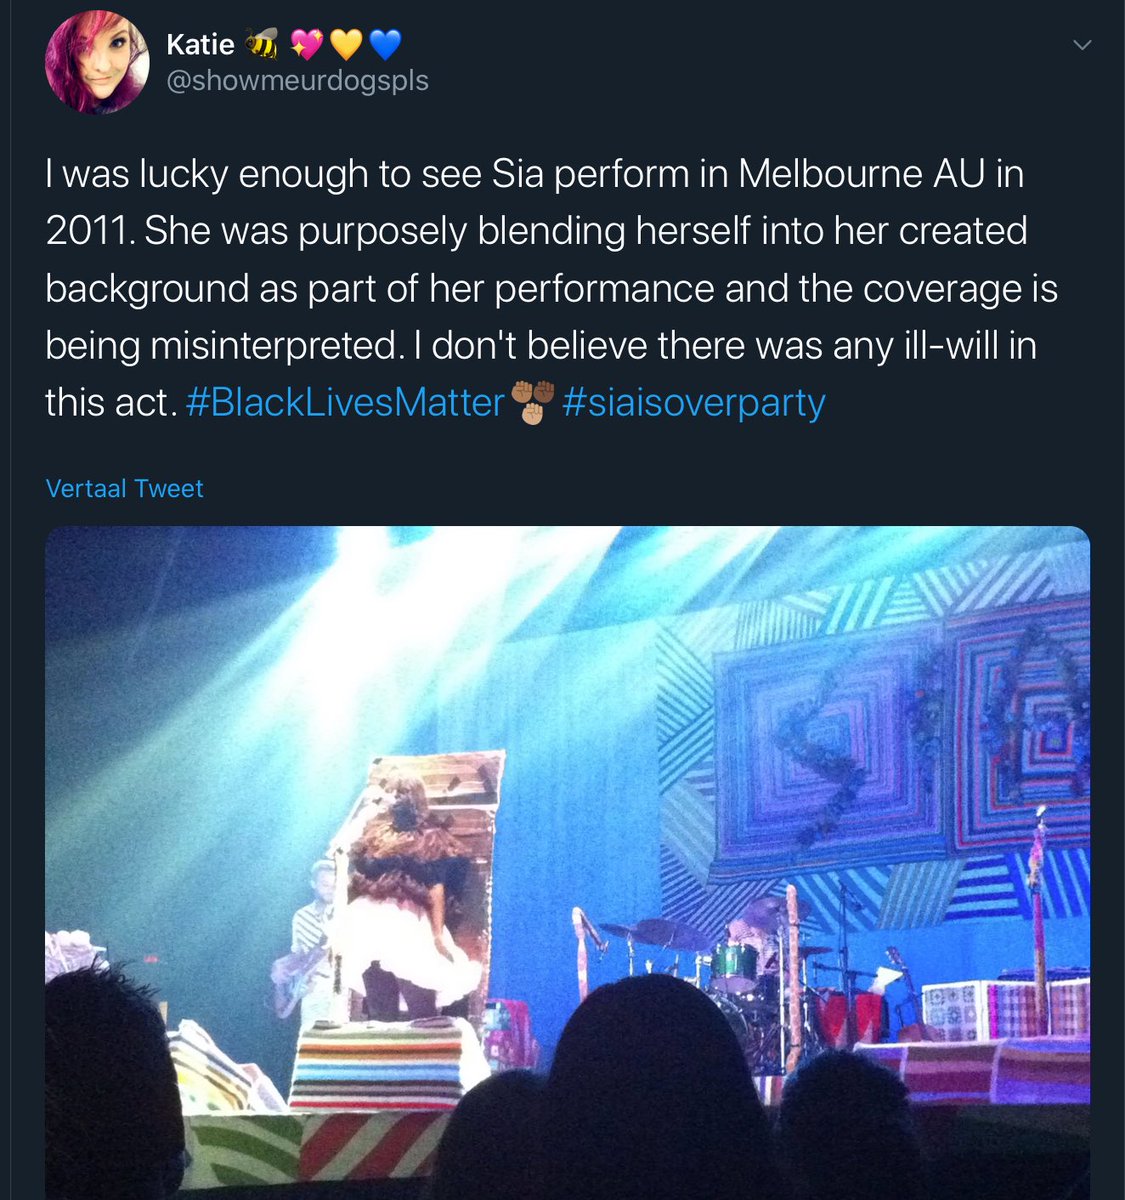 Sia has been accused of blackface because a photo was spread without context. She painted herself into the backdrop, as a pre-cursor to the wig. So it was just body paint, not her portraying herself as someone from another race.